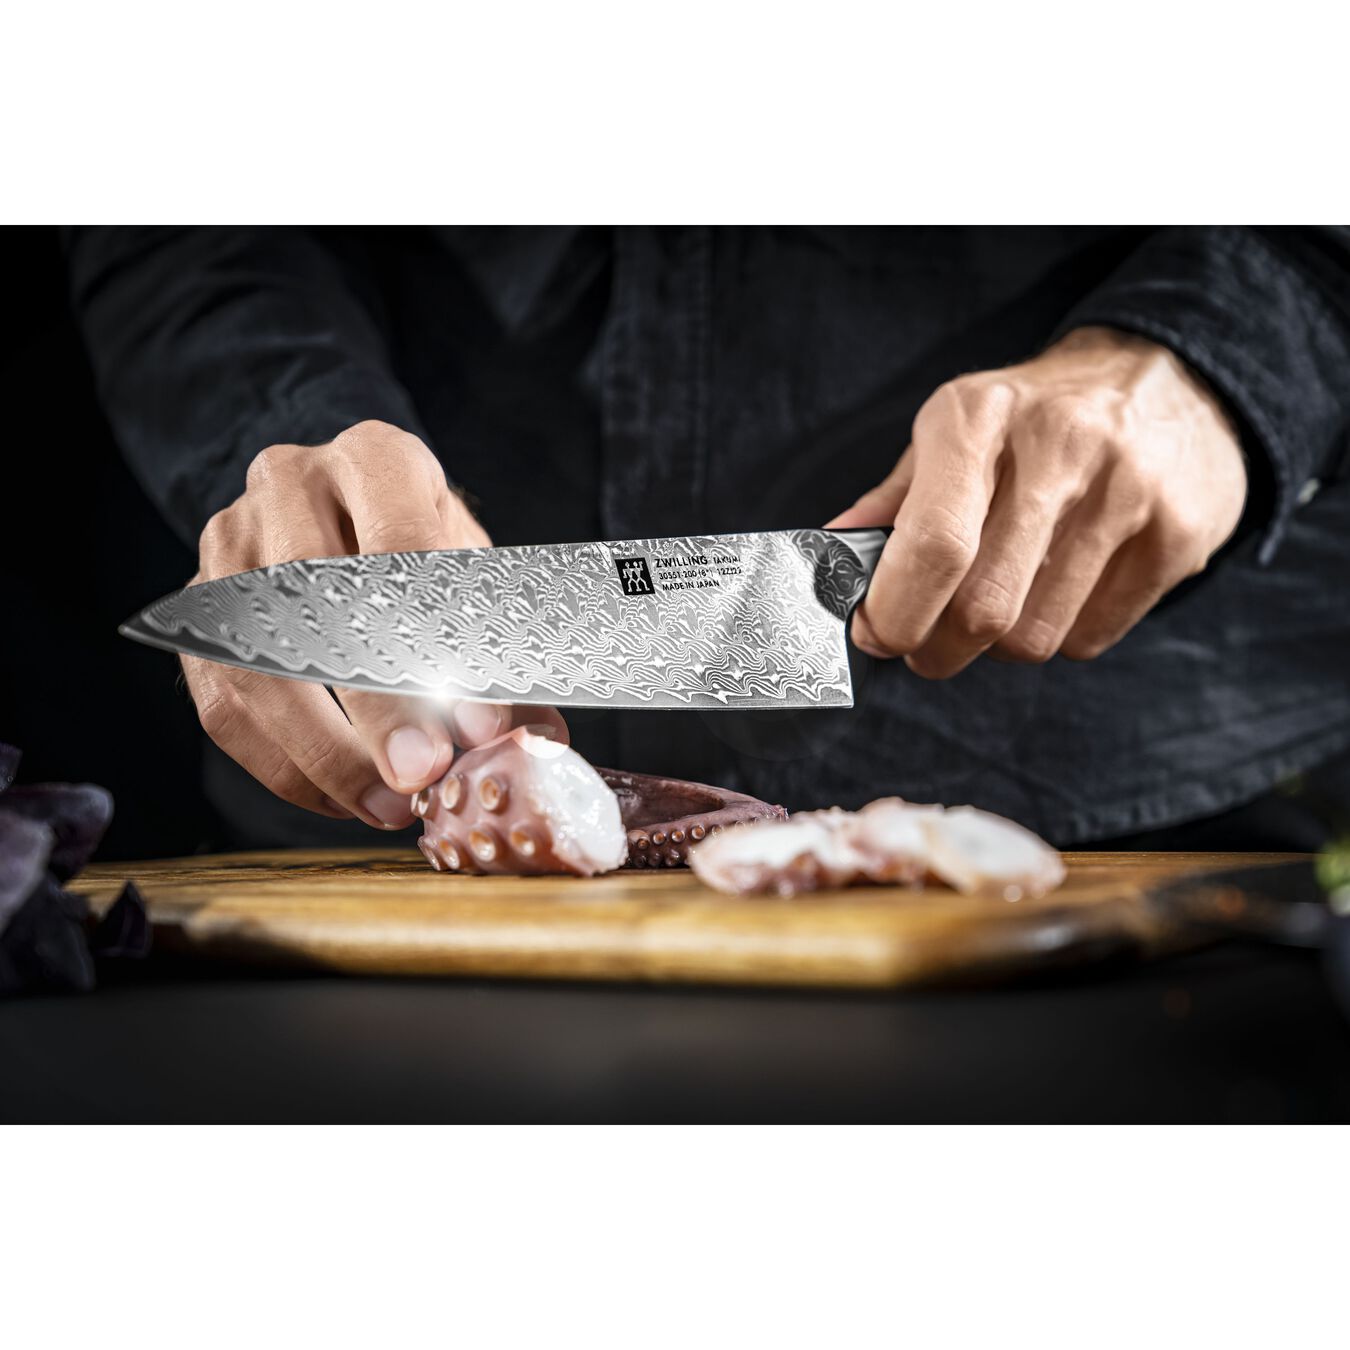 8 inch Chef's knife,,large 7